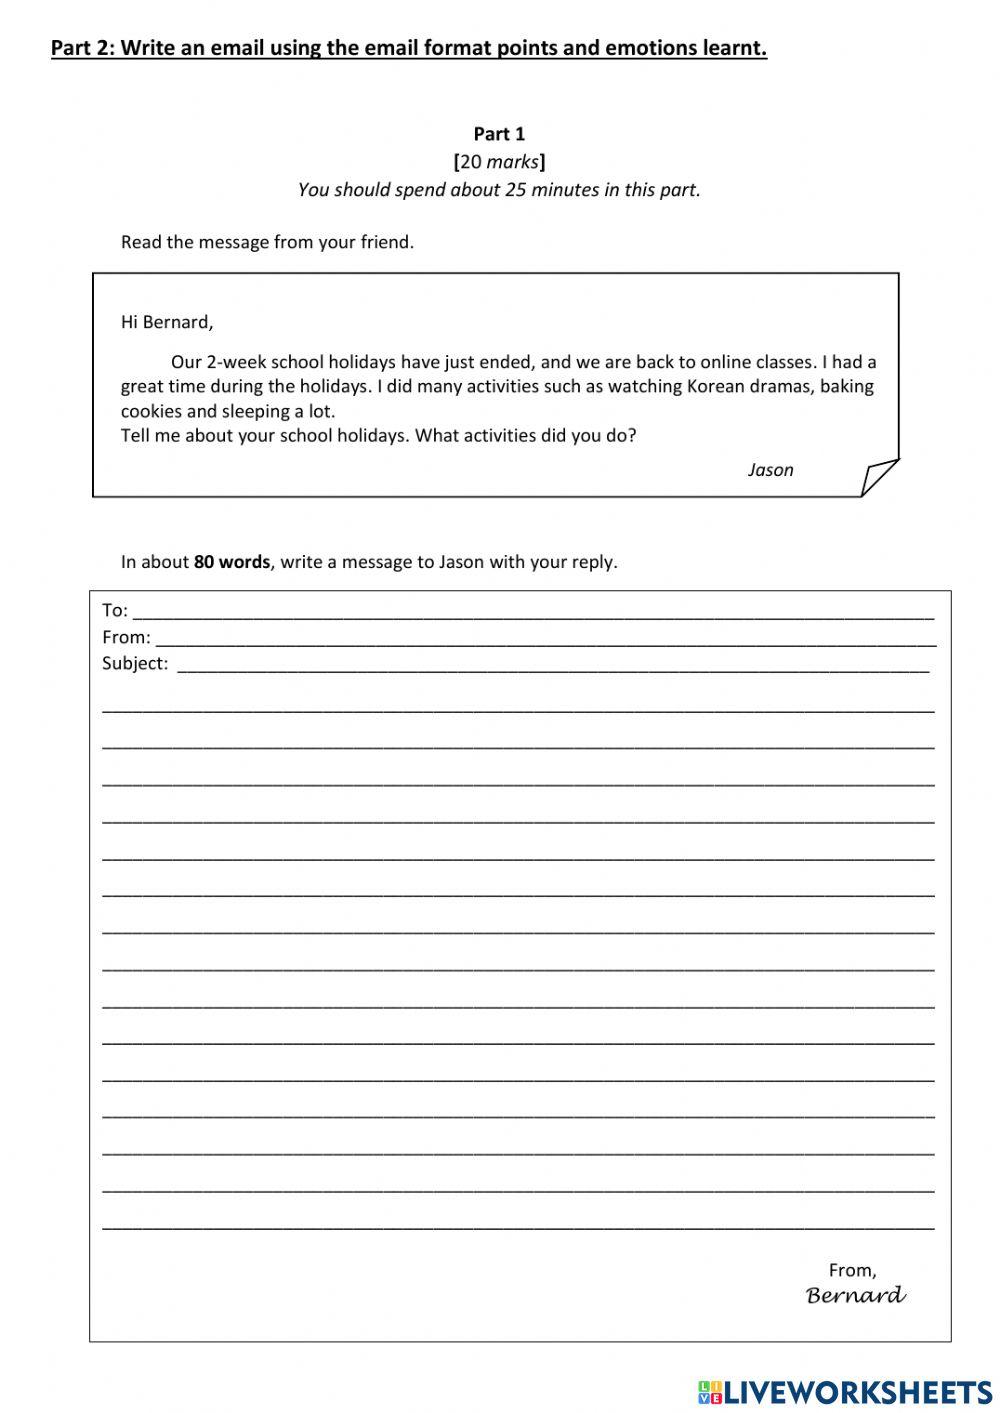 Email (Form 2 Unit 8 - English Pulse 2)